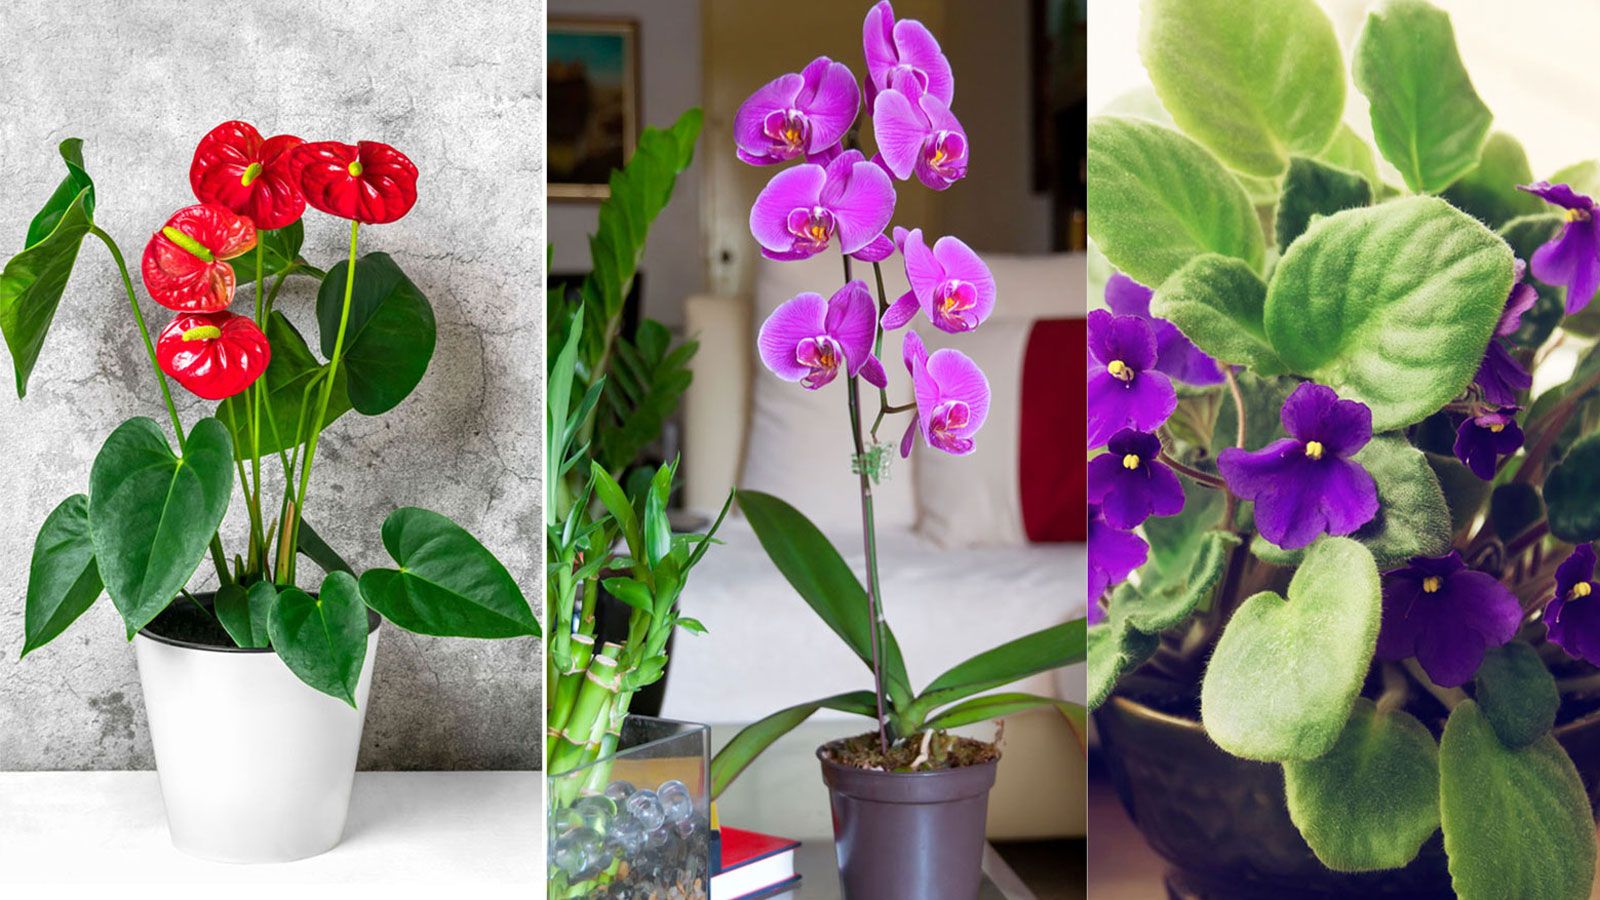 Indoor plants that flower all year round: 10 expert suggestions